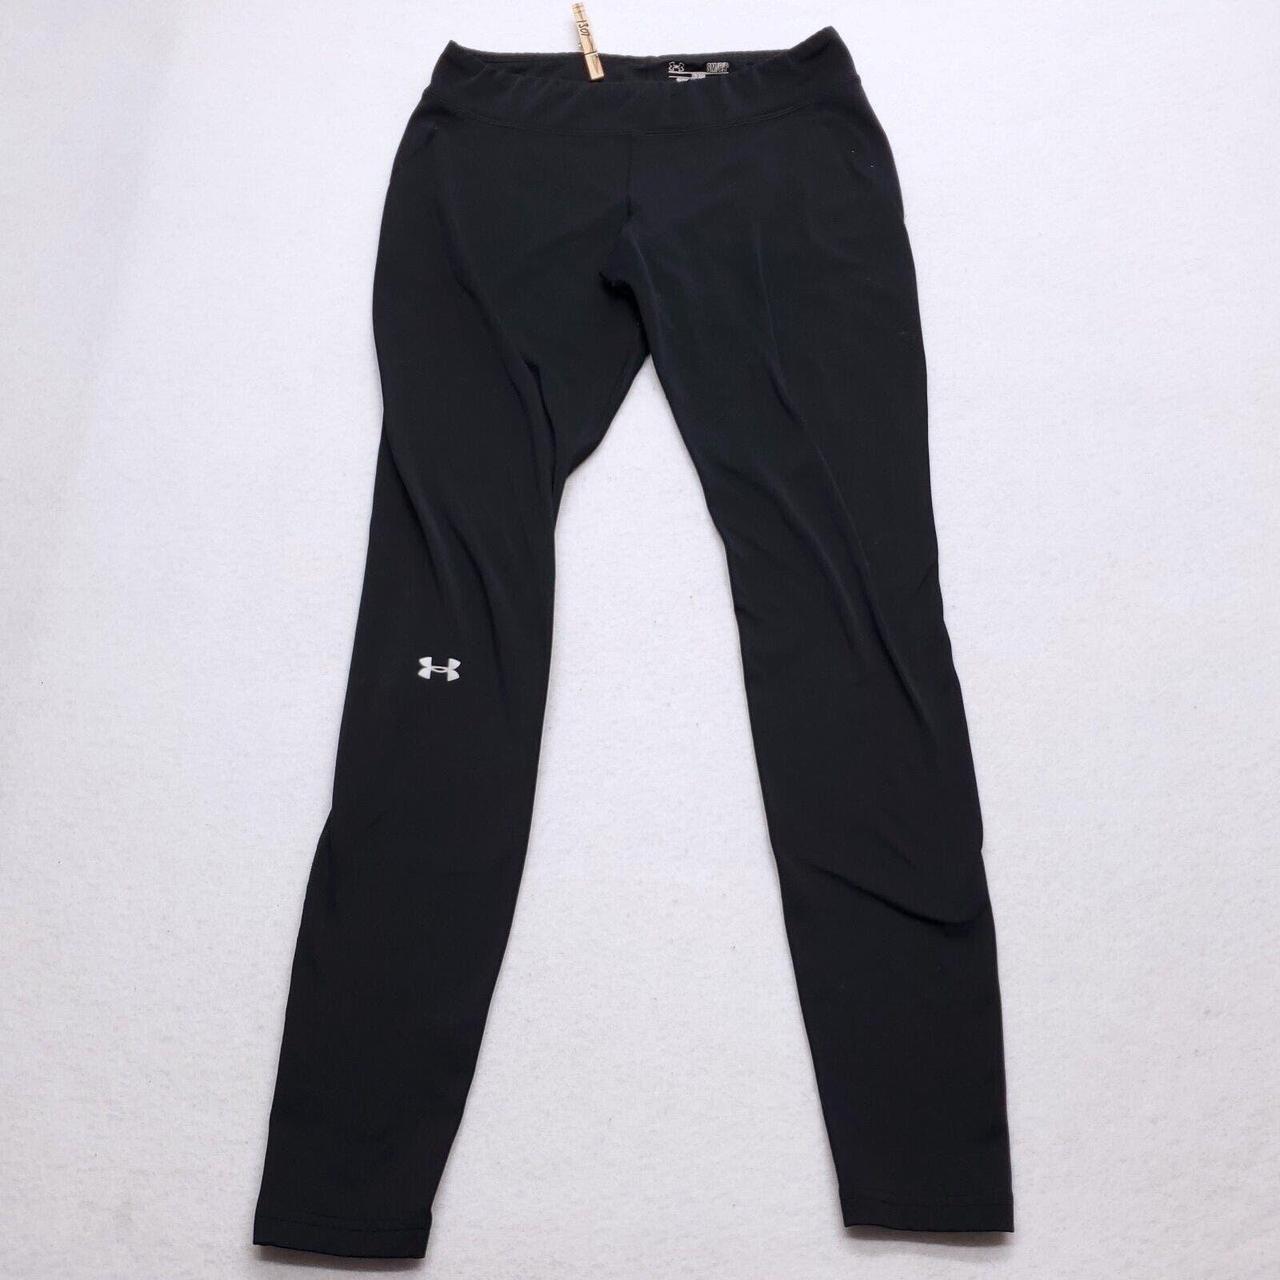 Under Armour Athletic Pull On Running Workout Pants - Depop